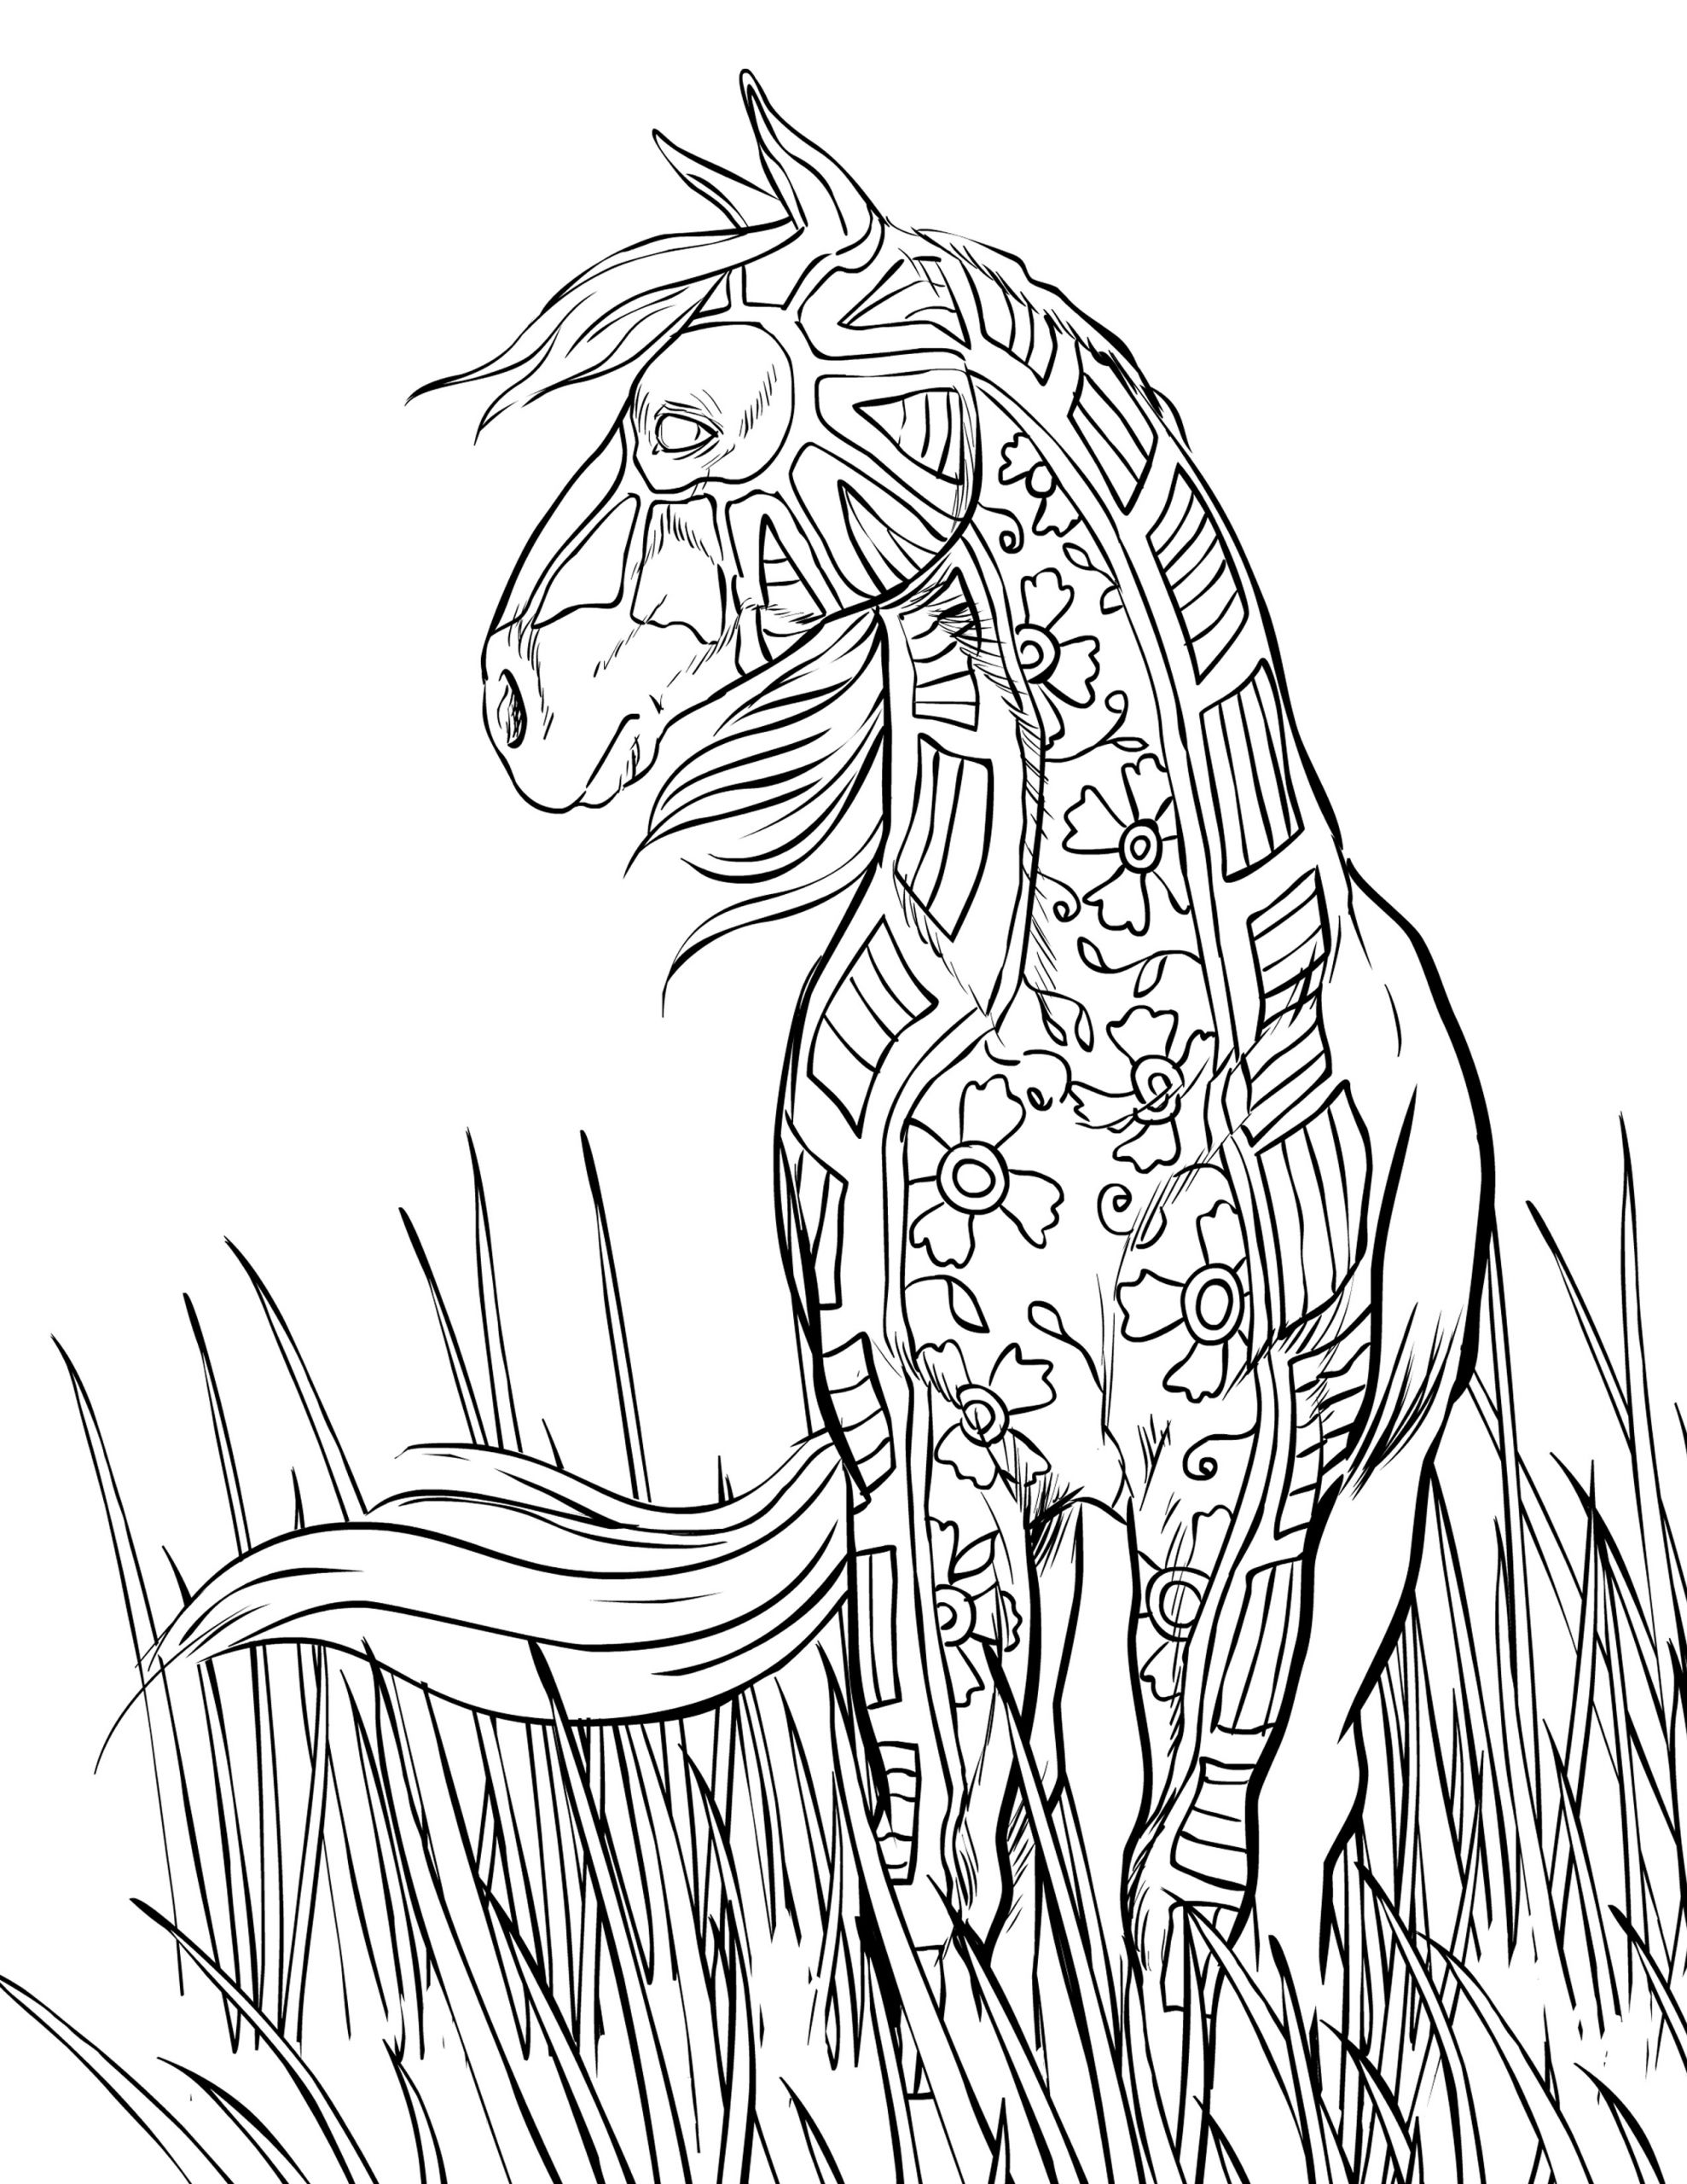 Adult Coloring Pages Horses
 FREE HORSE COLORING PAGES